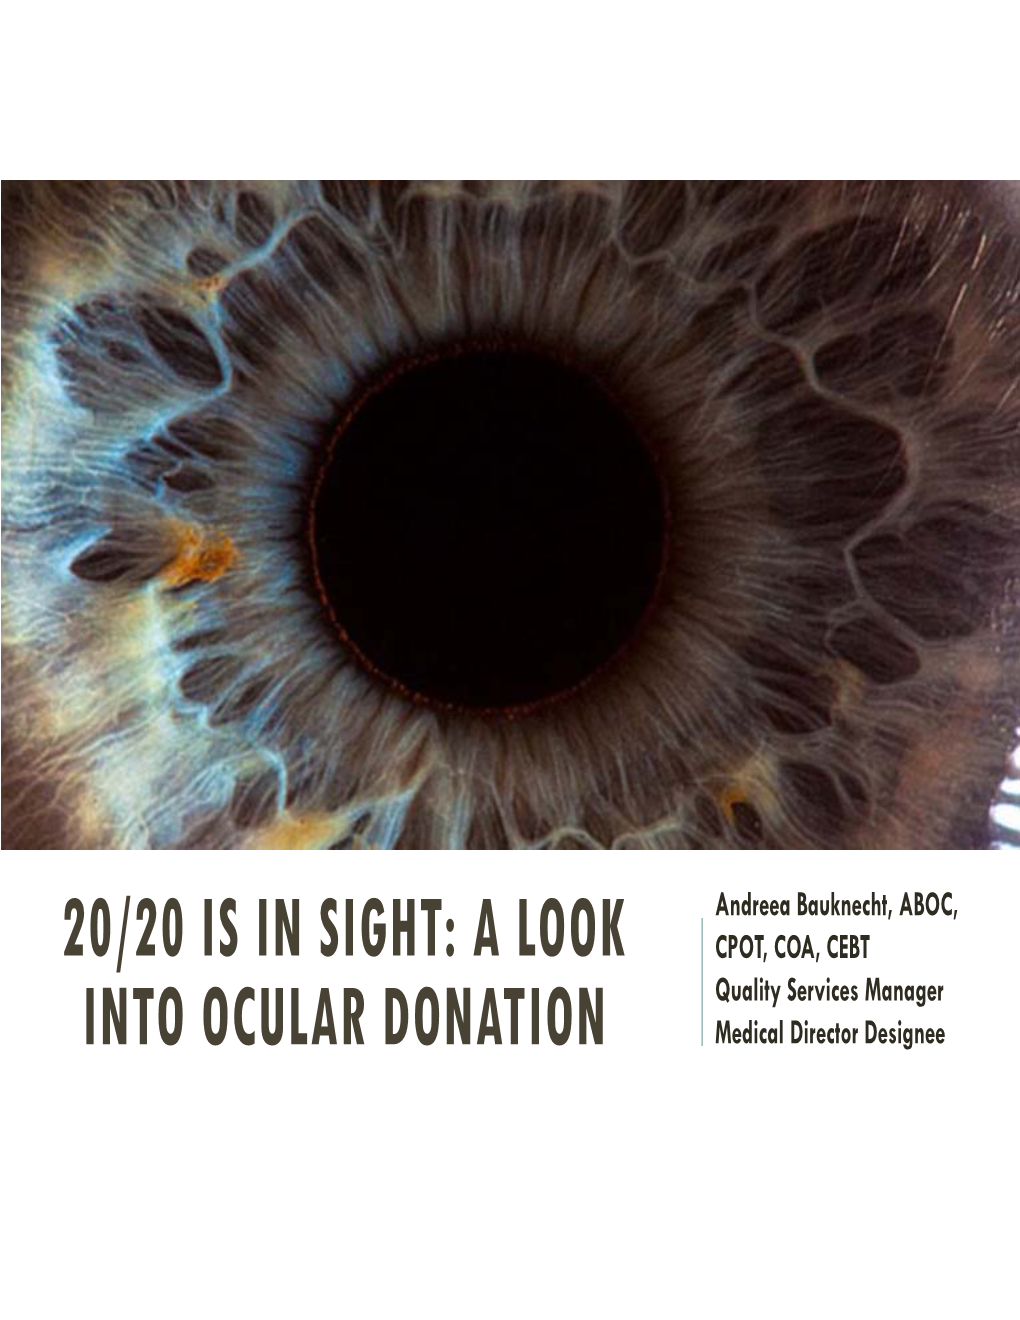 A Look Into Ocular Donation